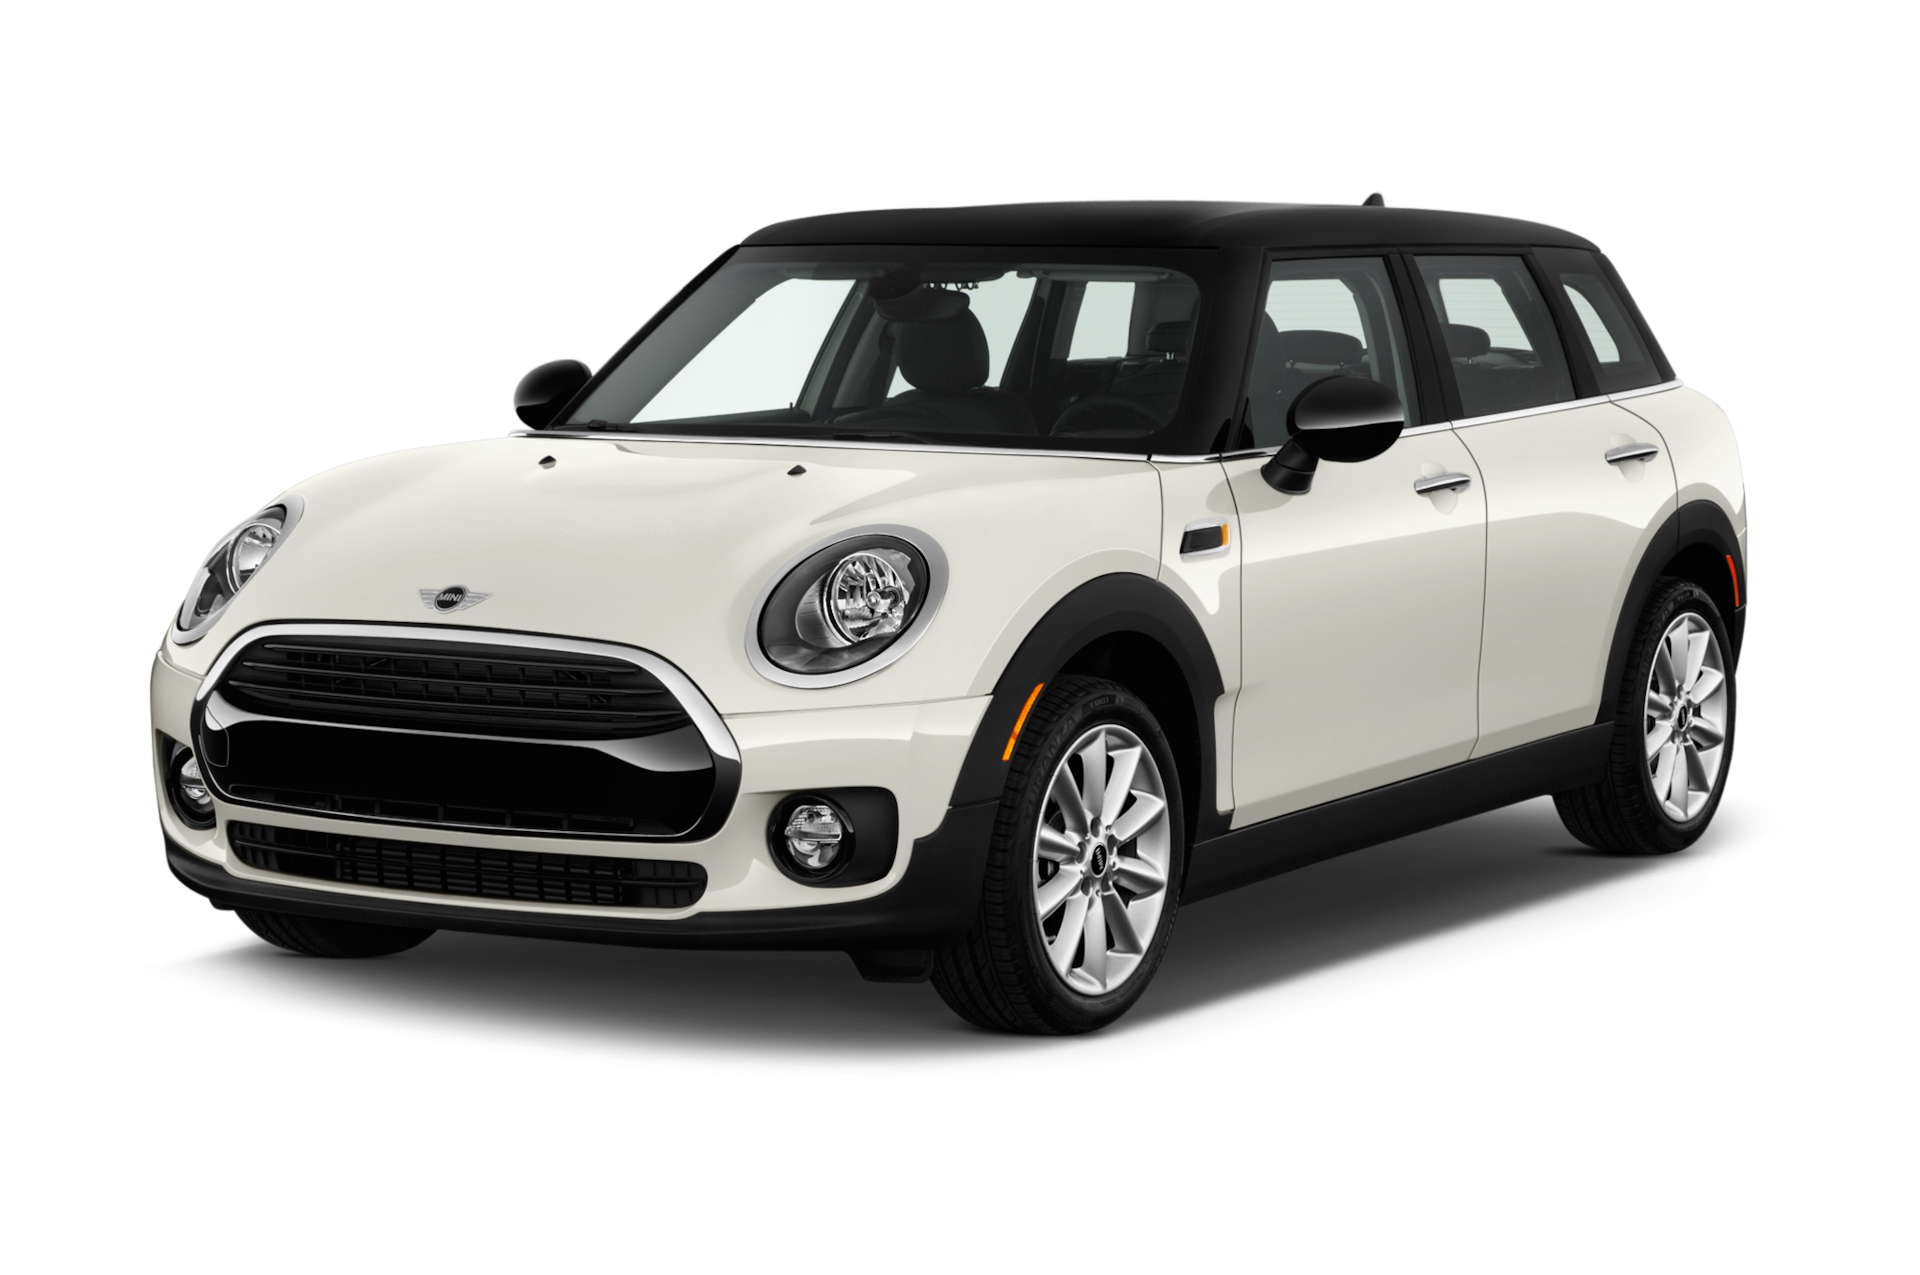 2016 MINI Cooper Clubman Prices, Reviews, and Photos - MotorTrend